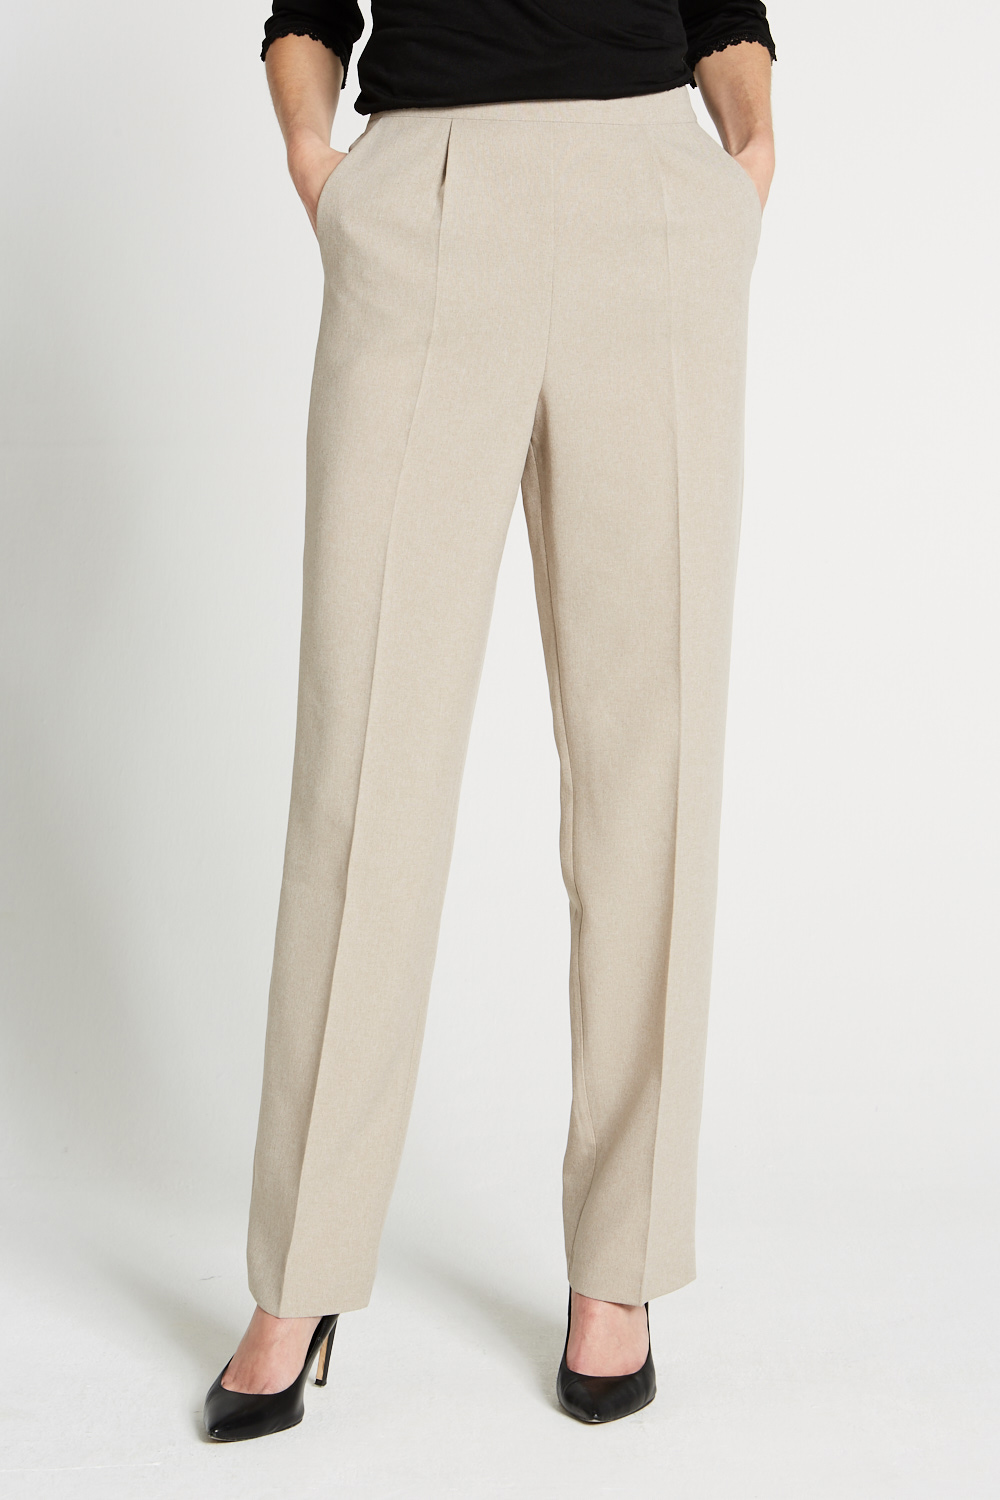 Buy Pull On Classic Leg Trousers | Home Delivery | Bonmarché